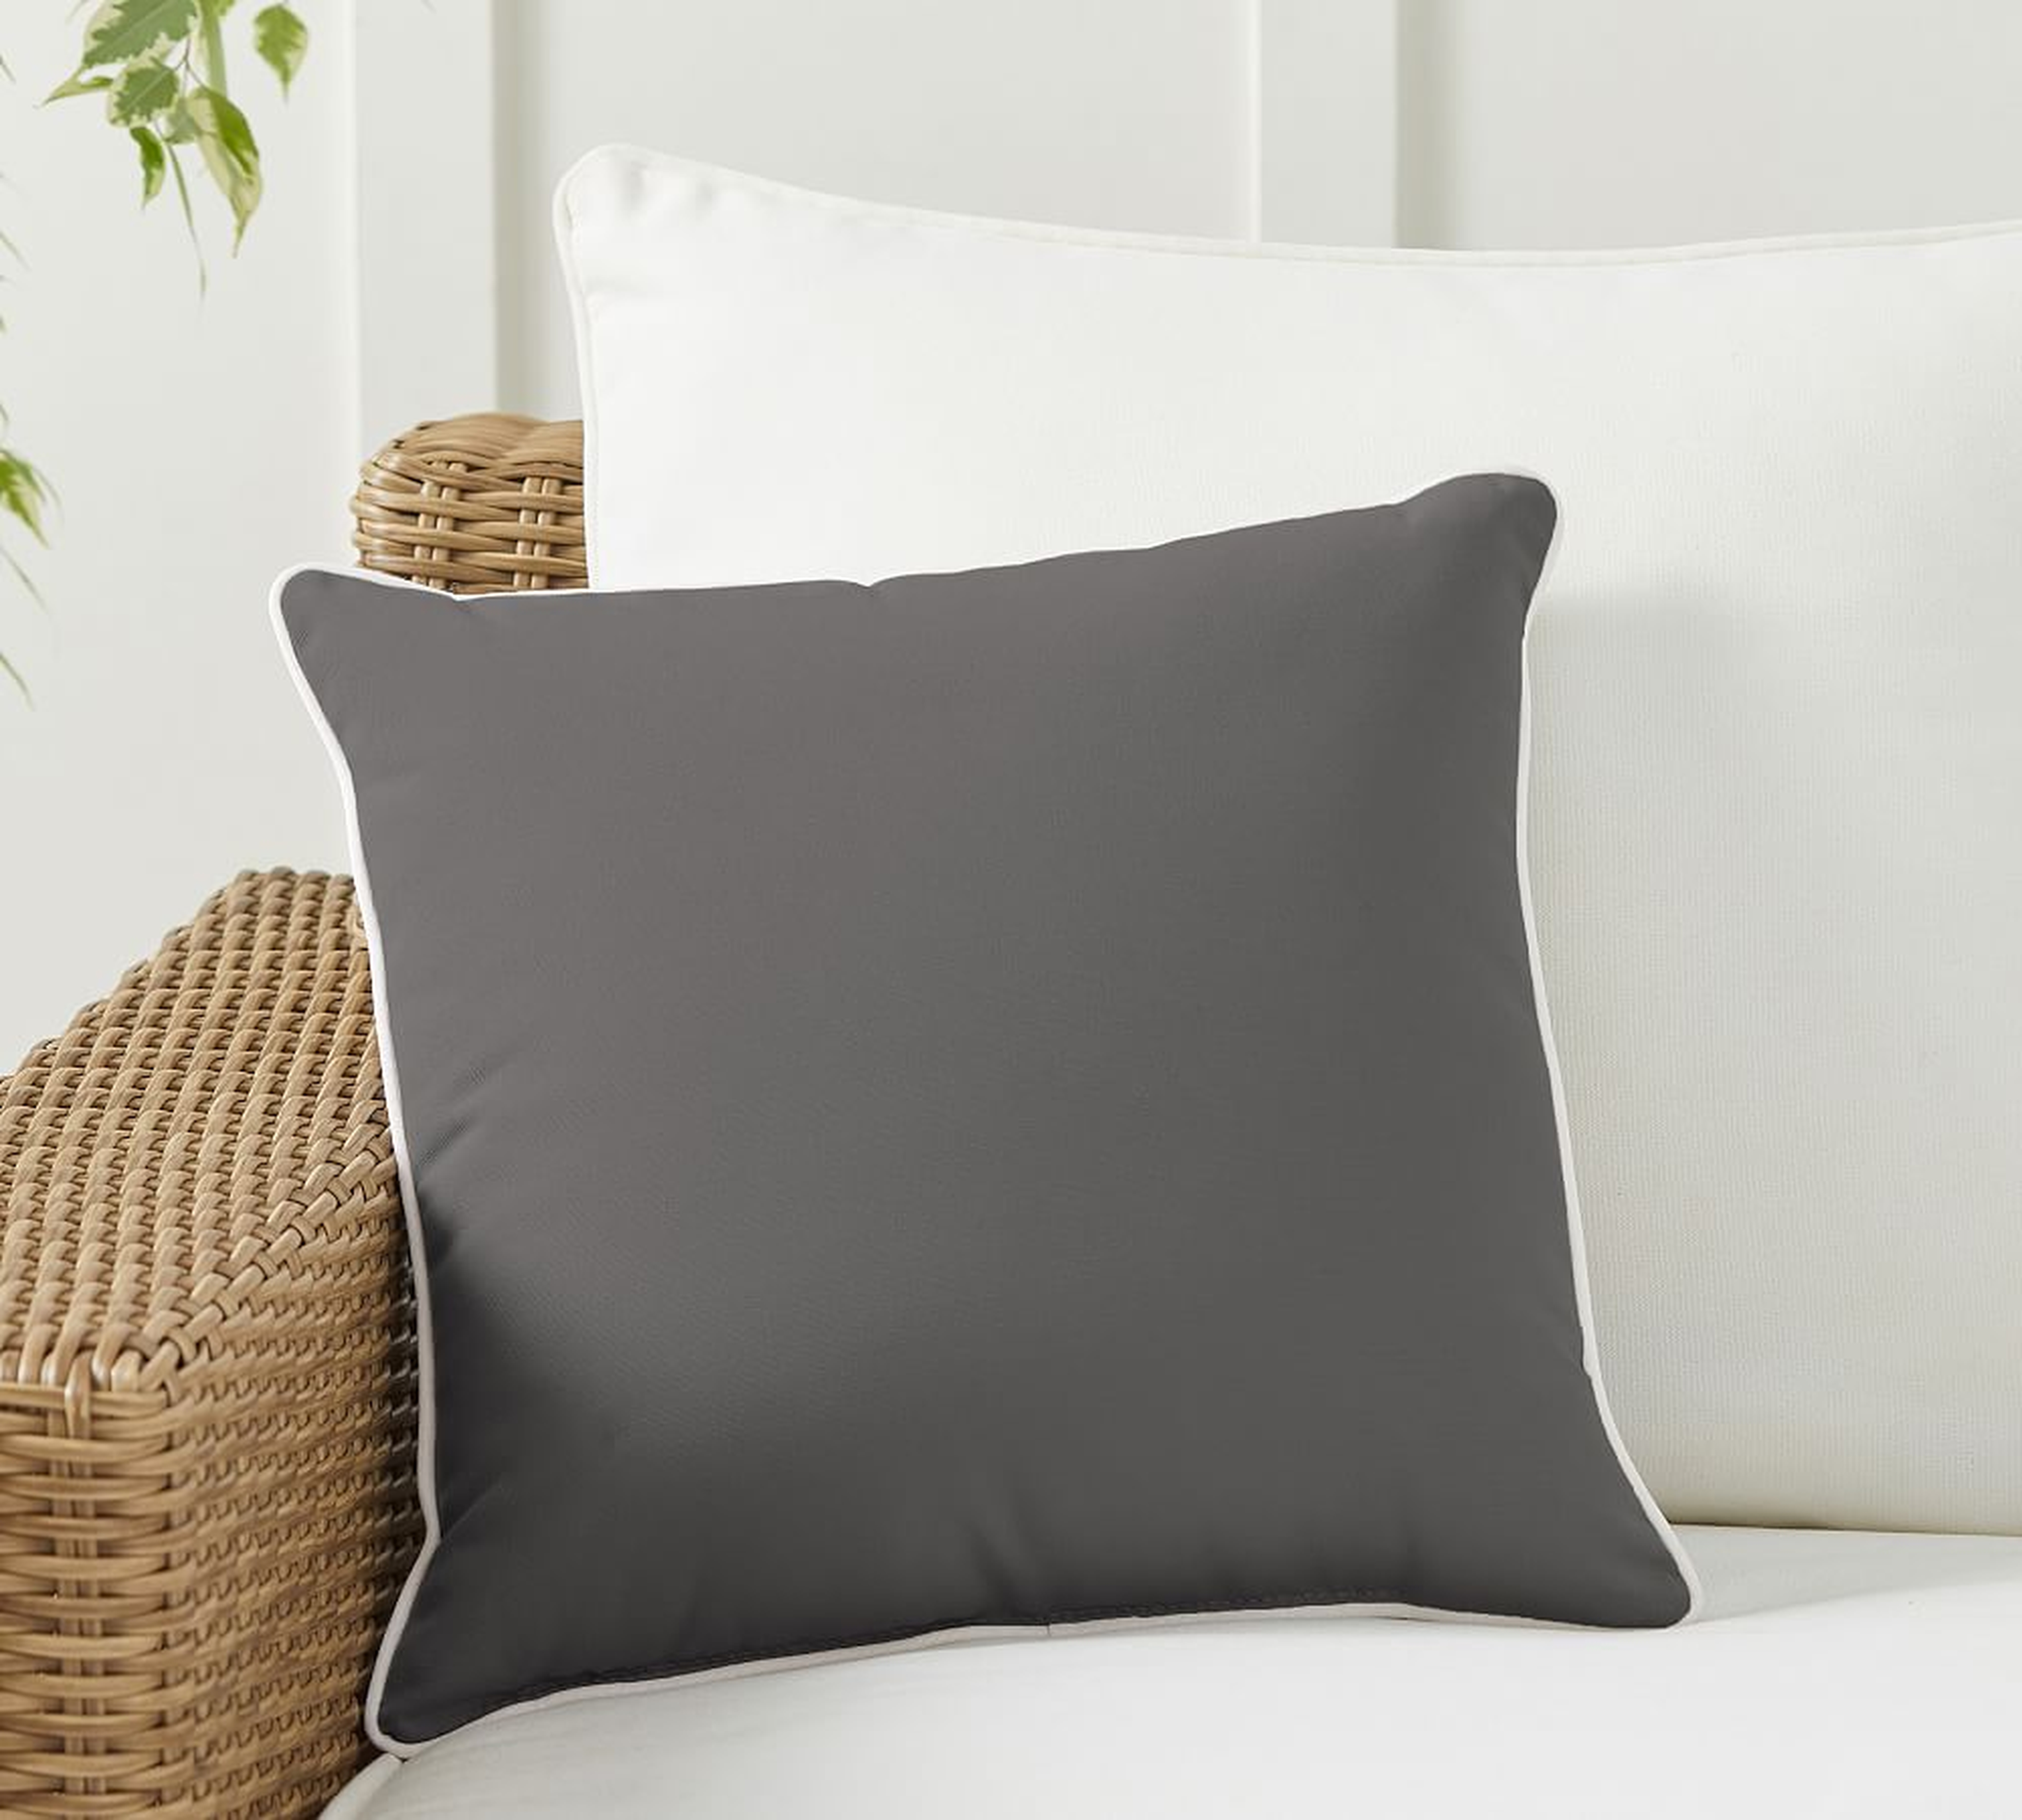 Sunbrella(R) Contrast Piped Solid Indoor/Outdoor Pillow, 18 x 18", Charcoal - Pottery Barn